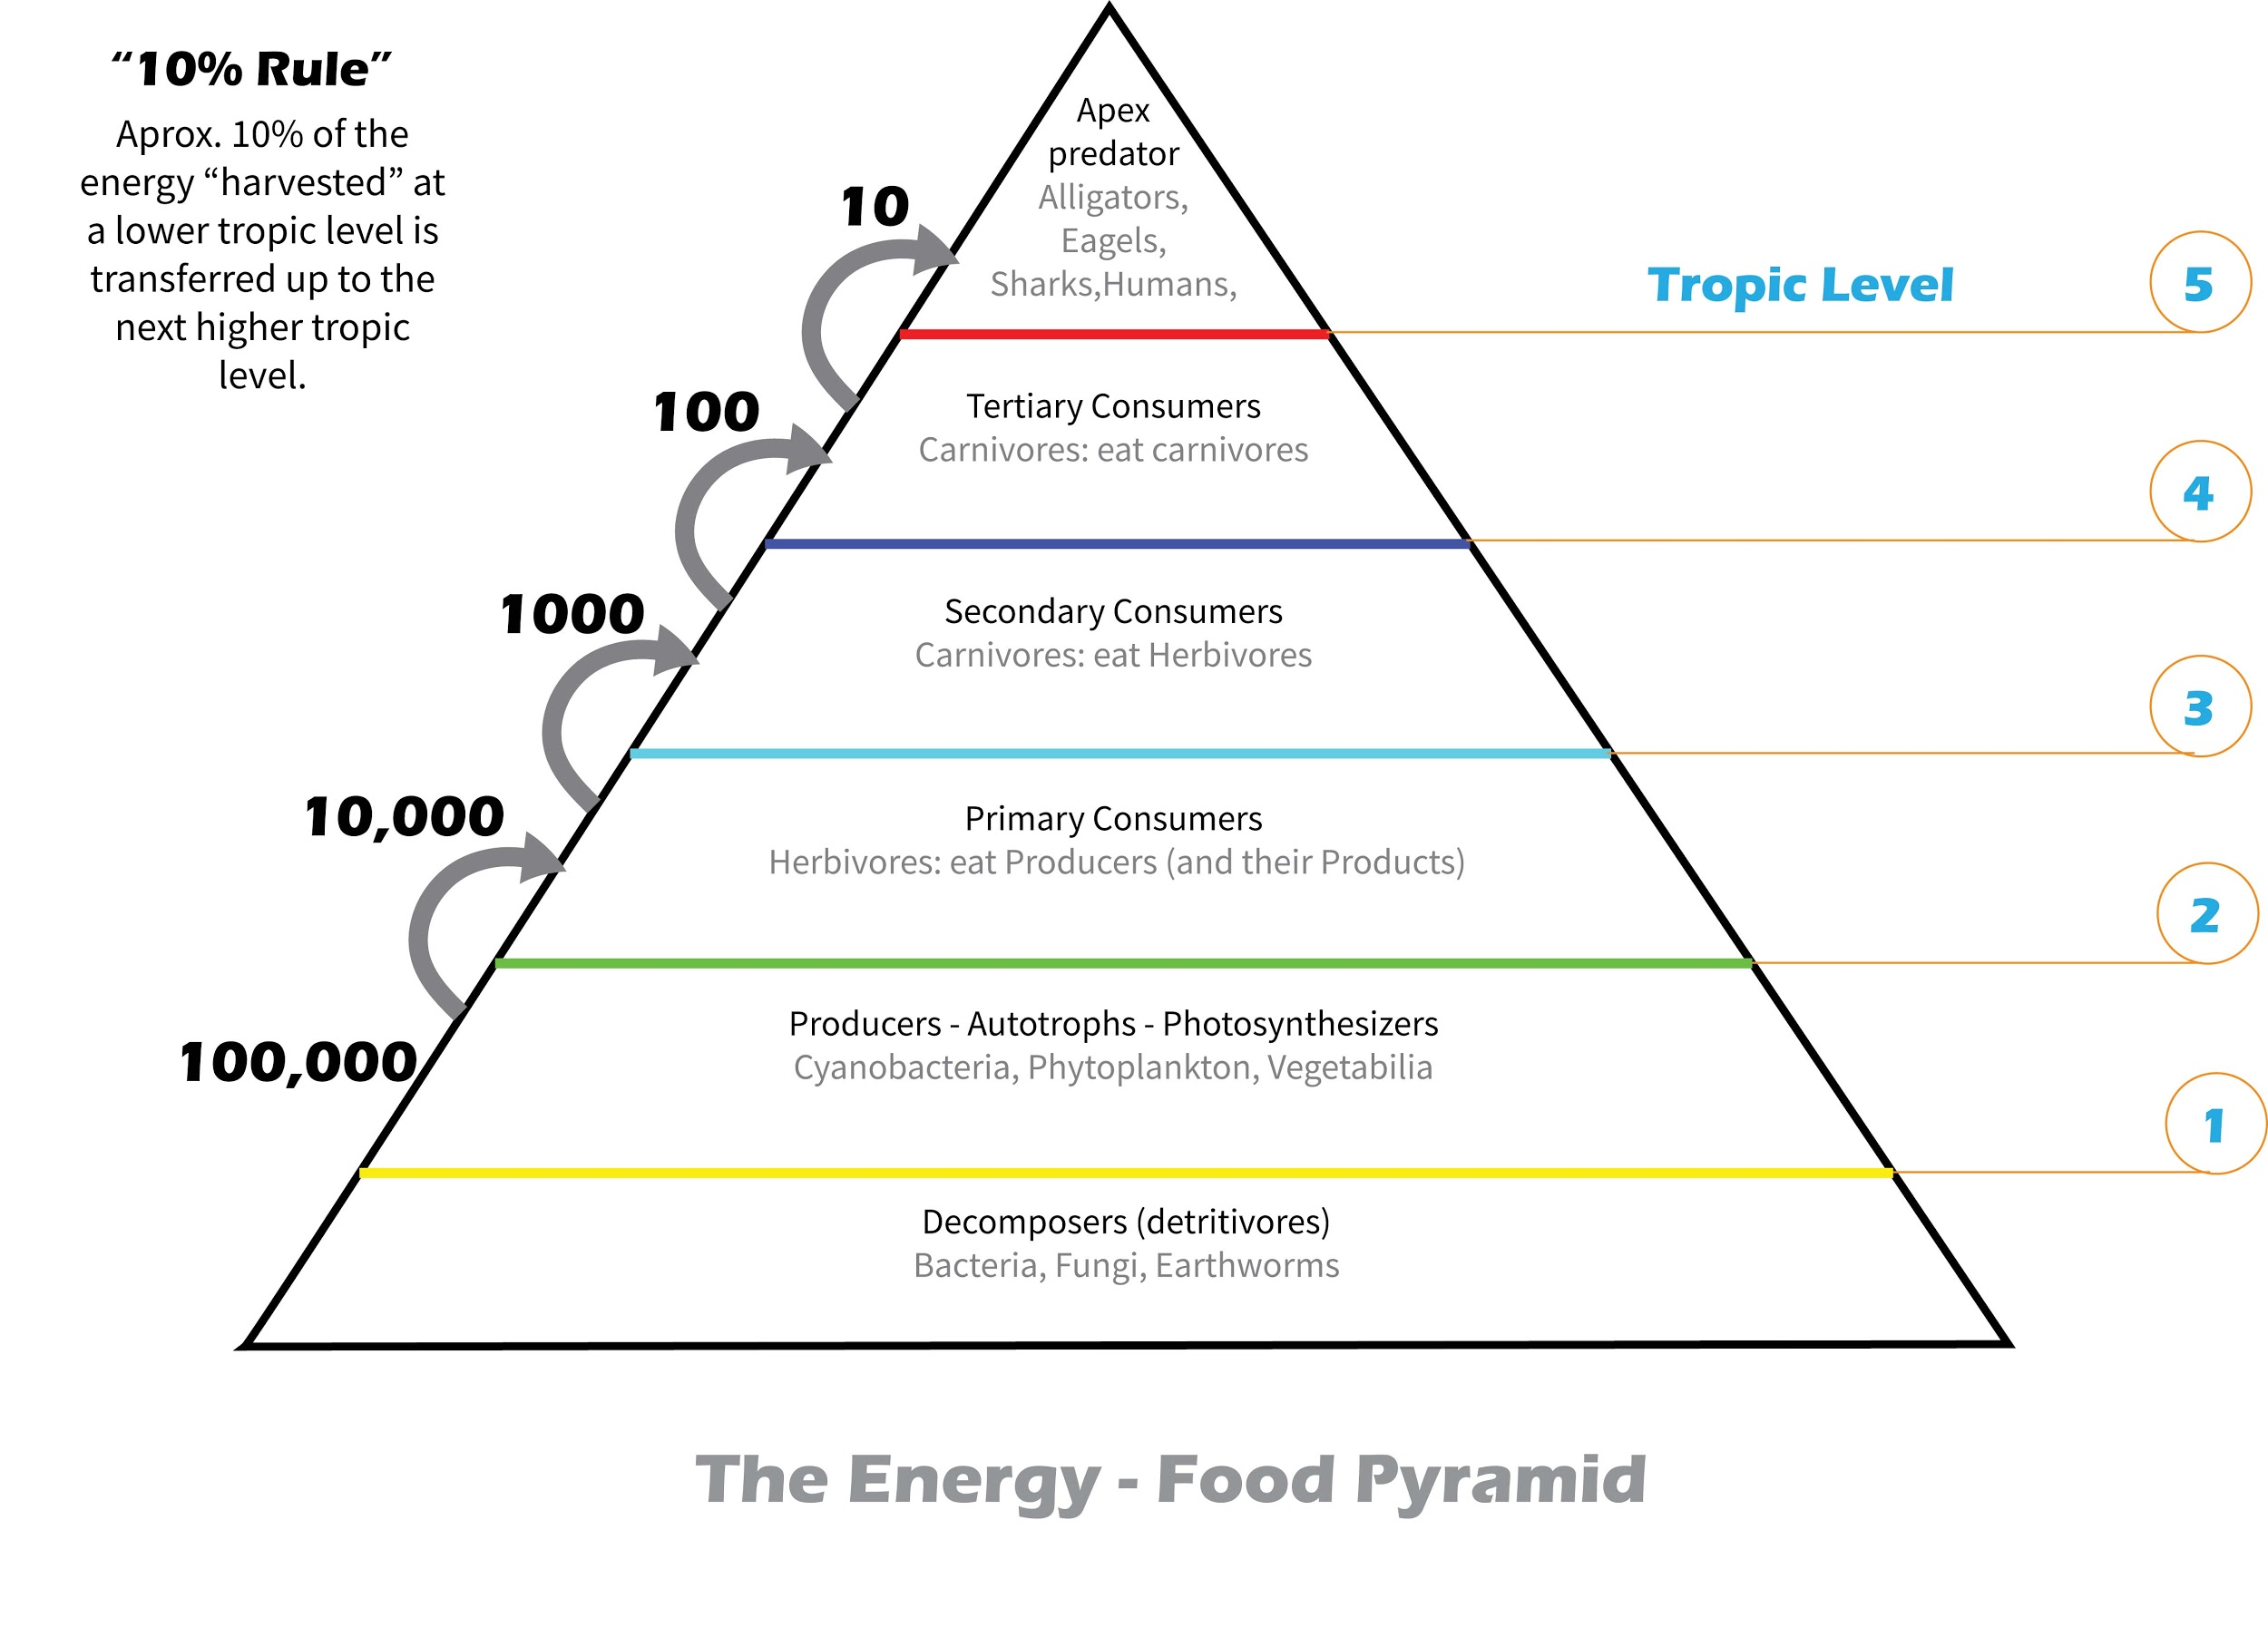 Draw the diagram of the pyramid of energy. Explain ‘In the ecosystem